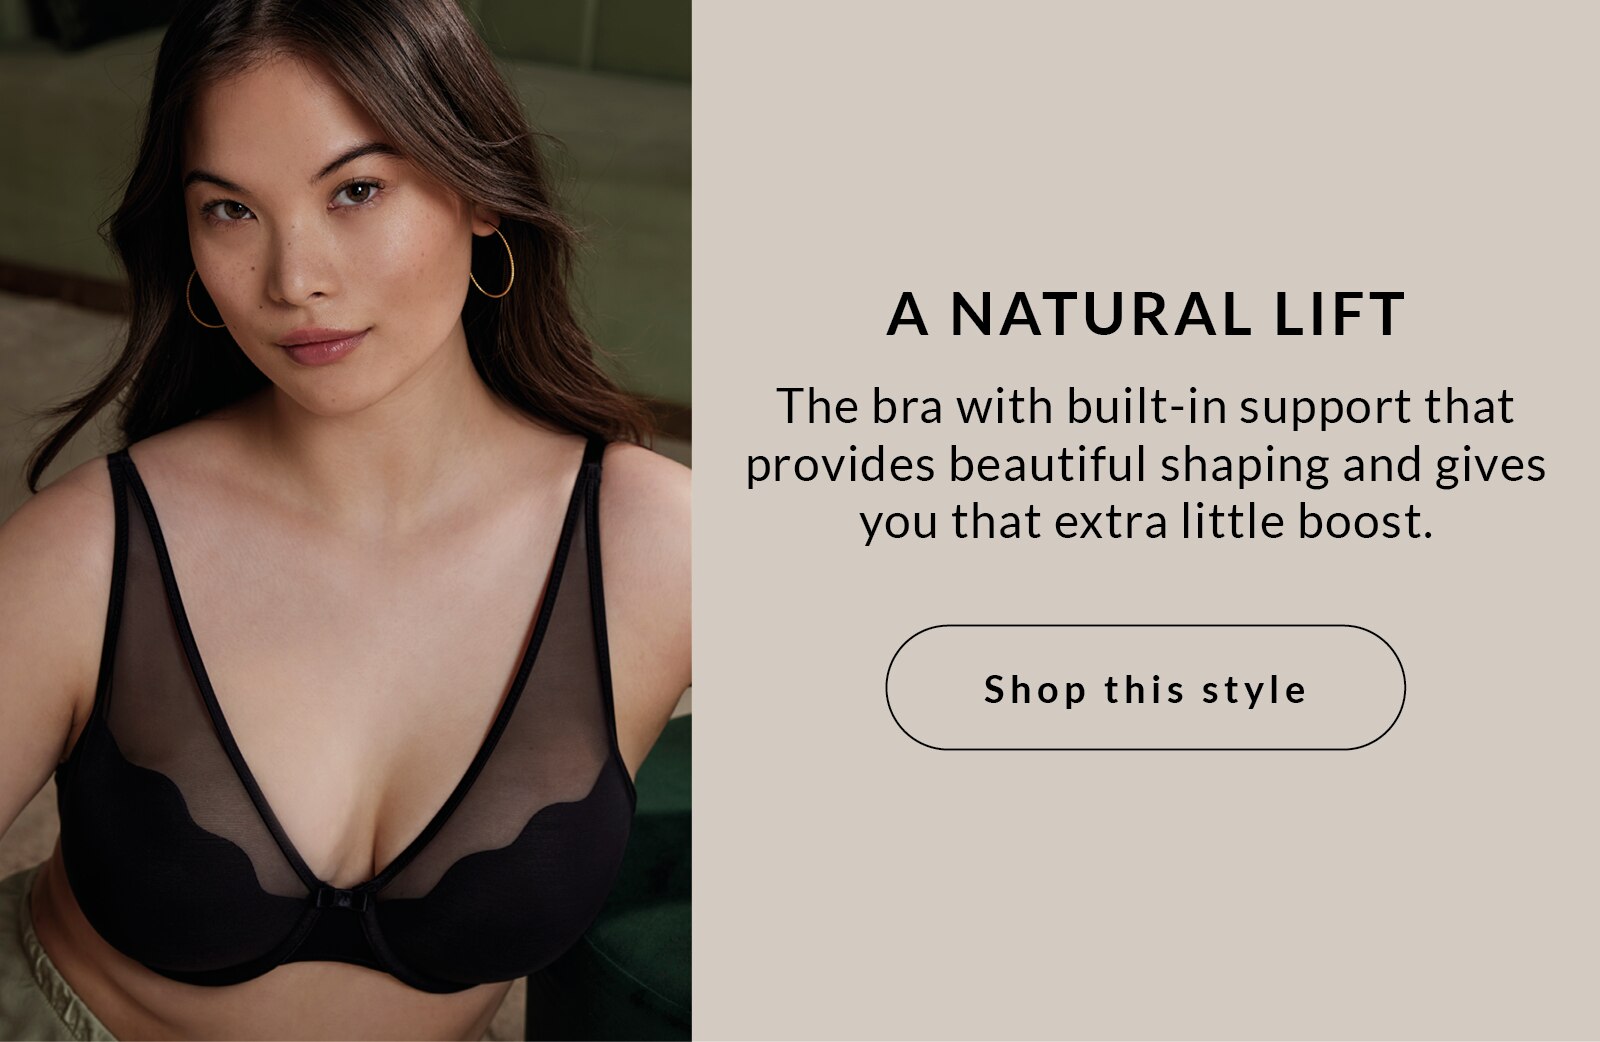 A natural lift The bra with built-in support that provides beautiful shaping and gives you that extra little boost.